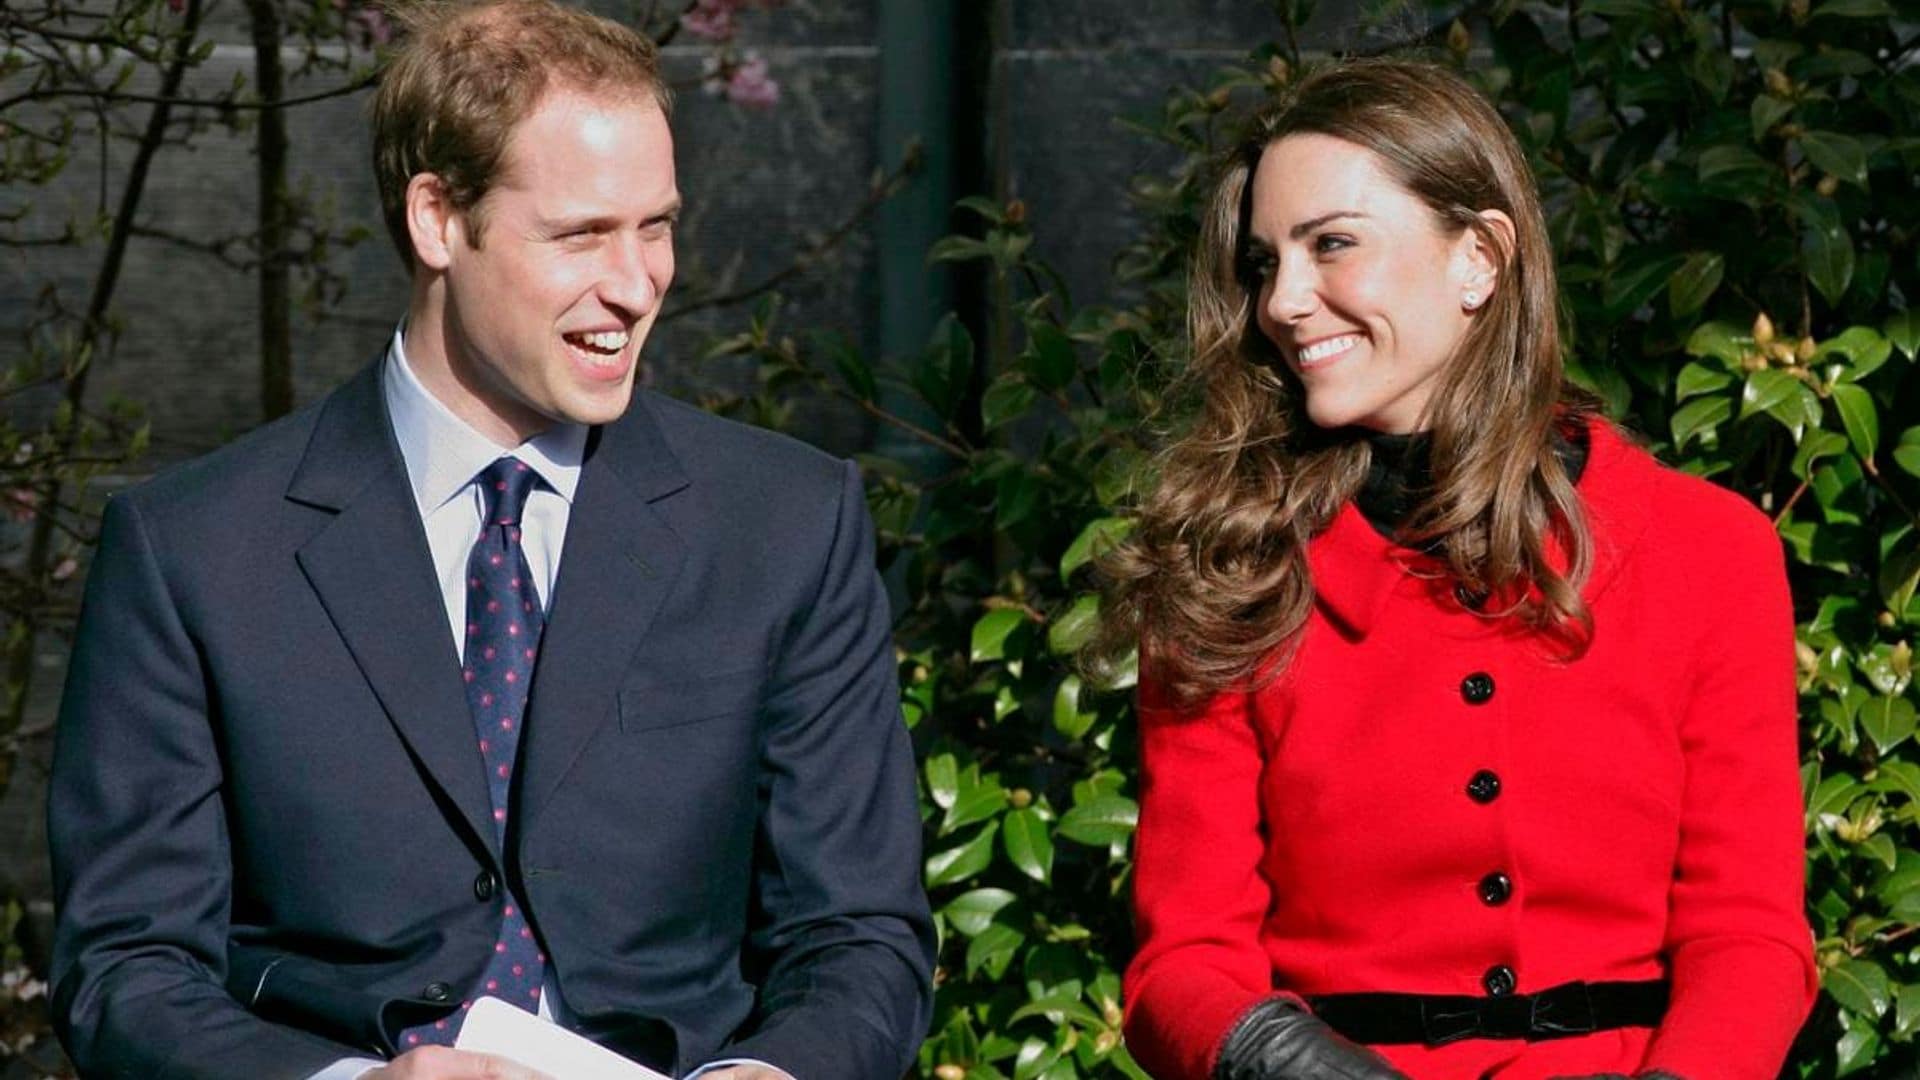 Find out who is going to play Prince William and Kate on ‘The Crown’